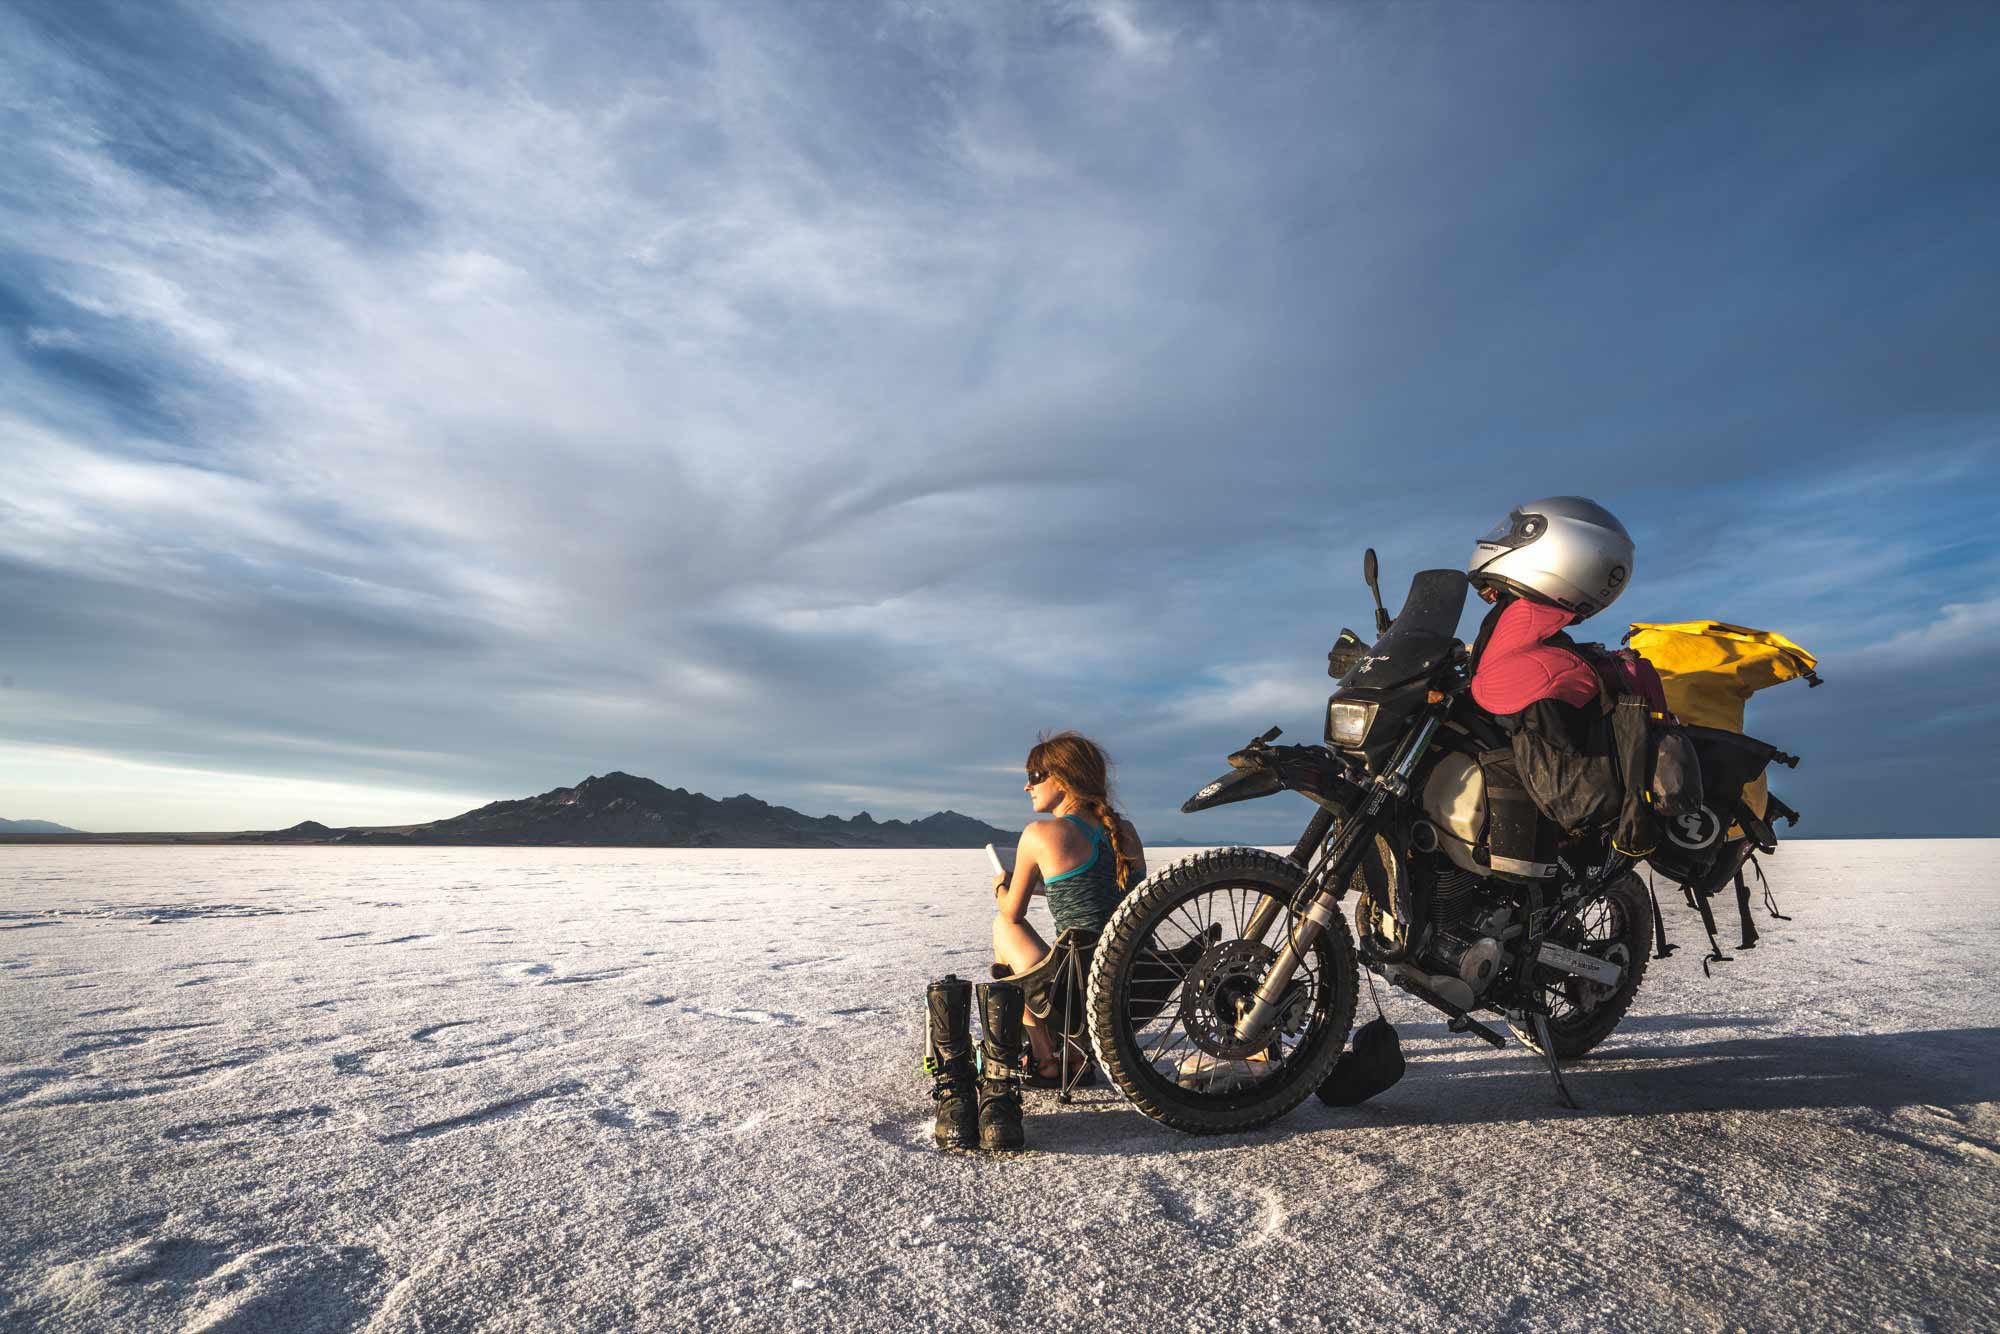 With 80,000 miles clocked on the odometer since docking our container ship into Uruguay, I’d stopped seeing our trip as an extended holiday. Our ride had become a way of life for Jason and me. It enabled us to stop trying to matter; it made us ready to simply live. (Bonneville Salt Flats, Utah)